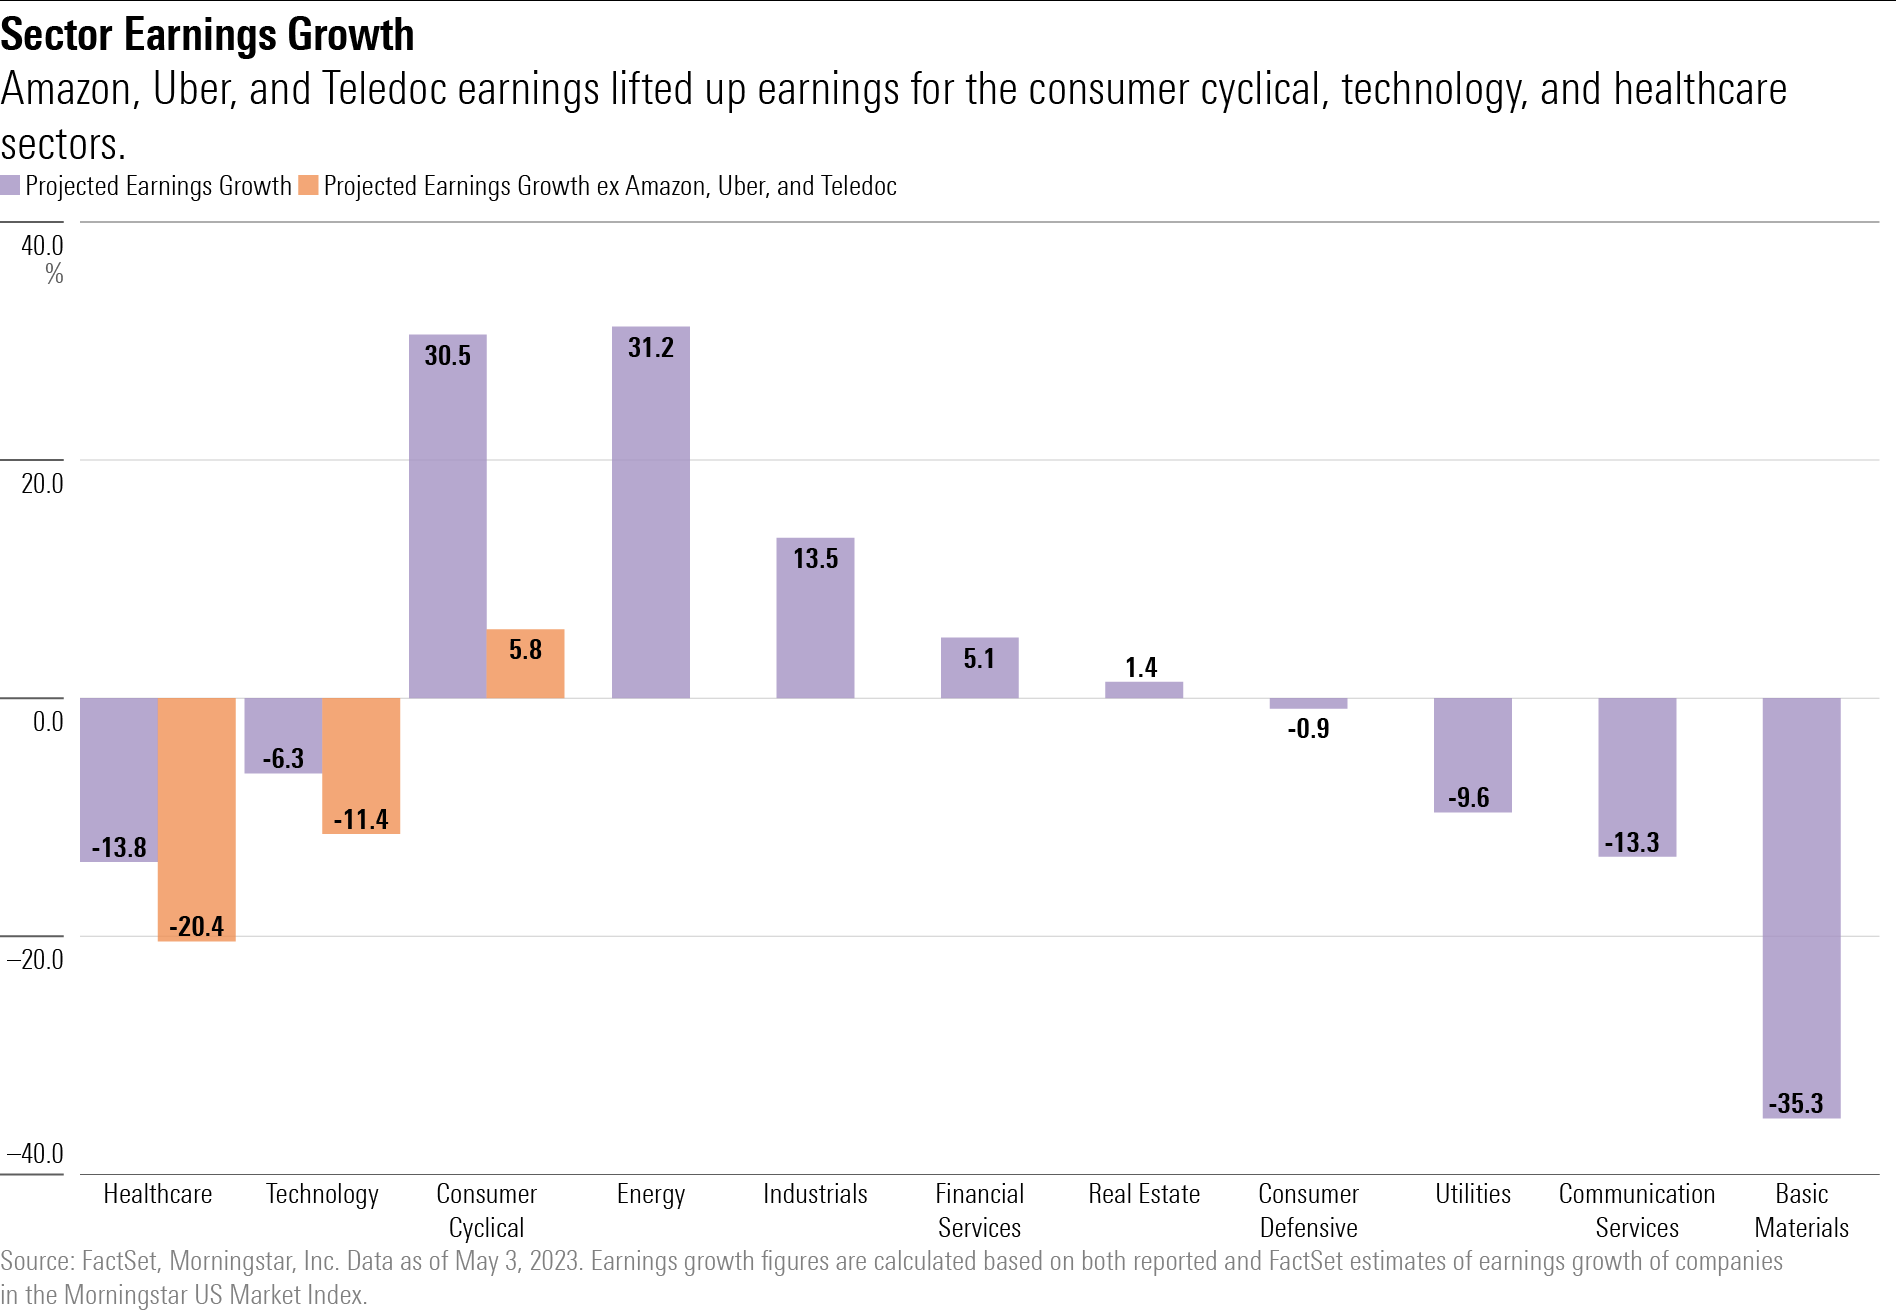 A semi-grouped bar chart showing projected earnings growth by sector.